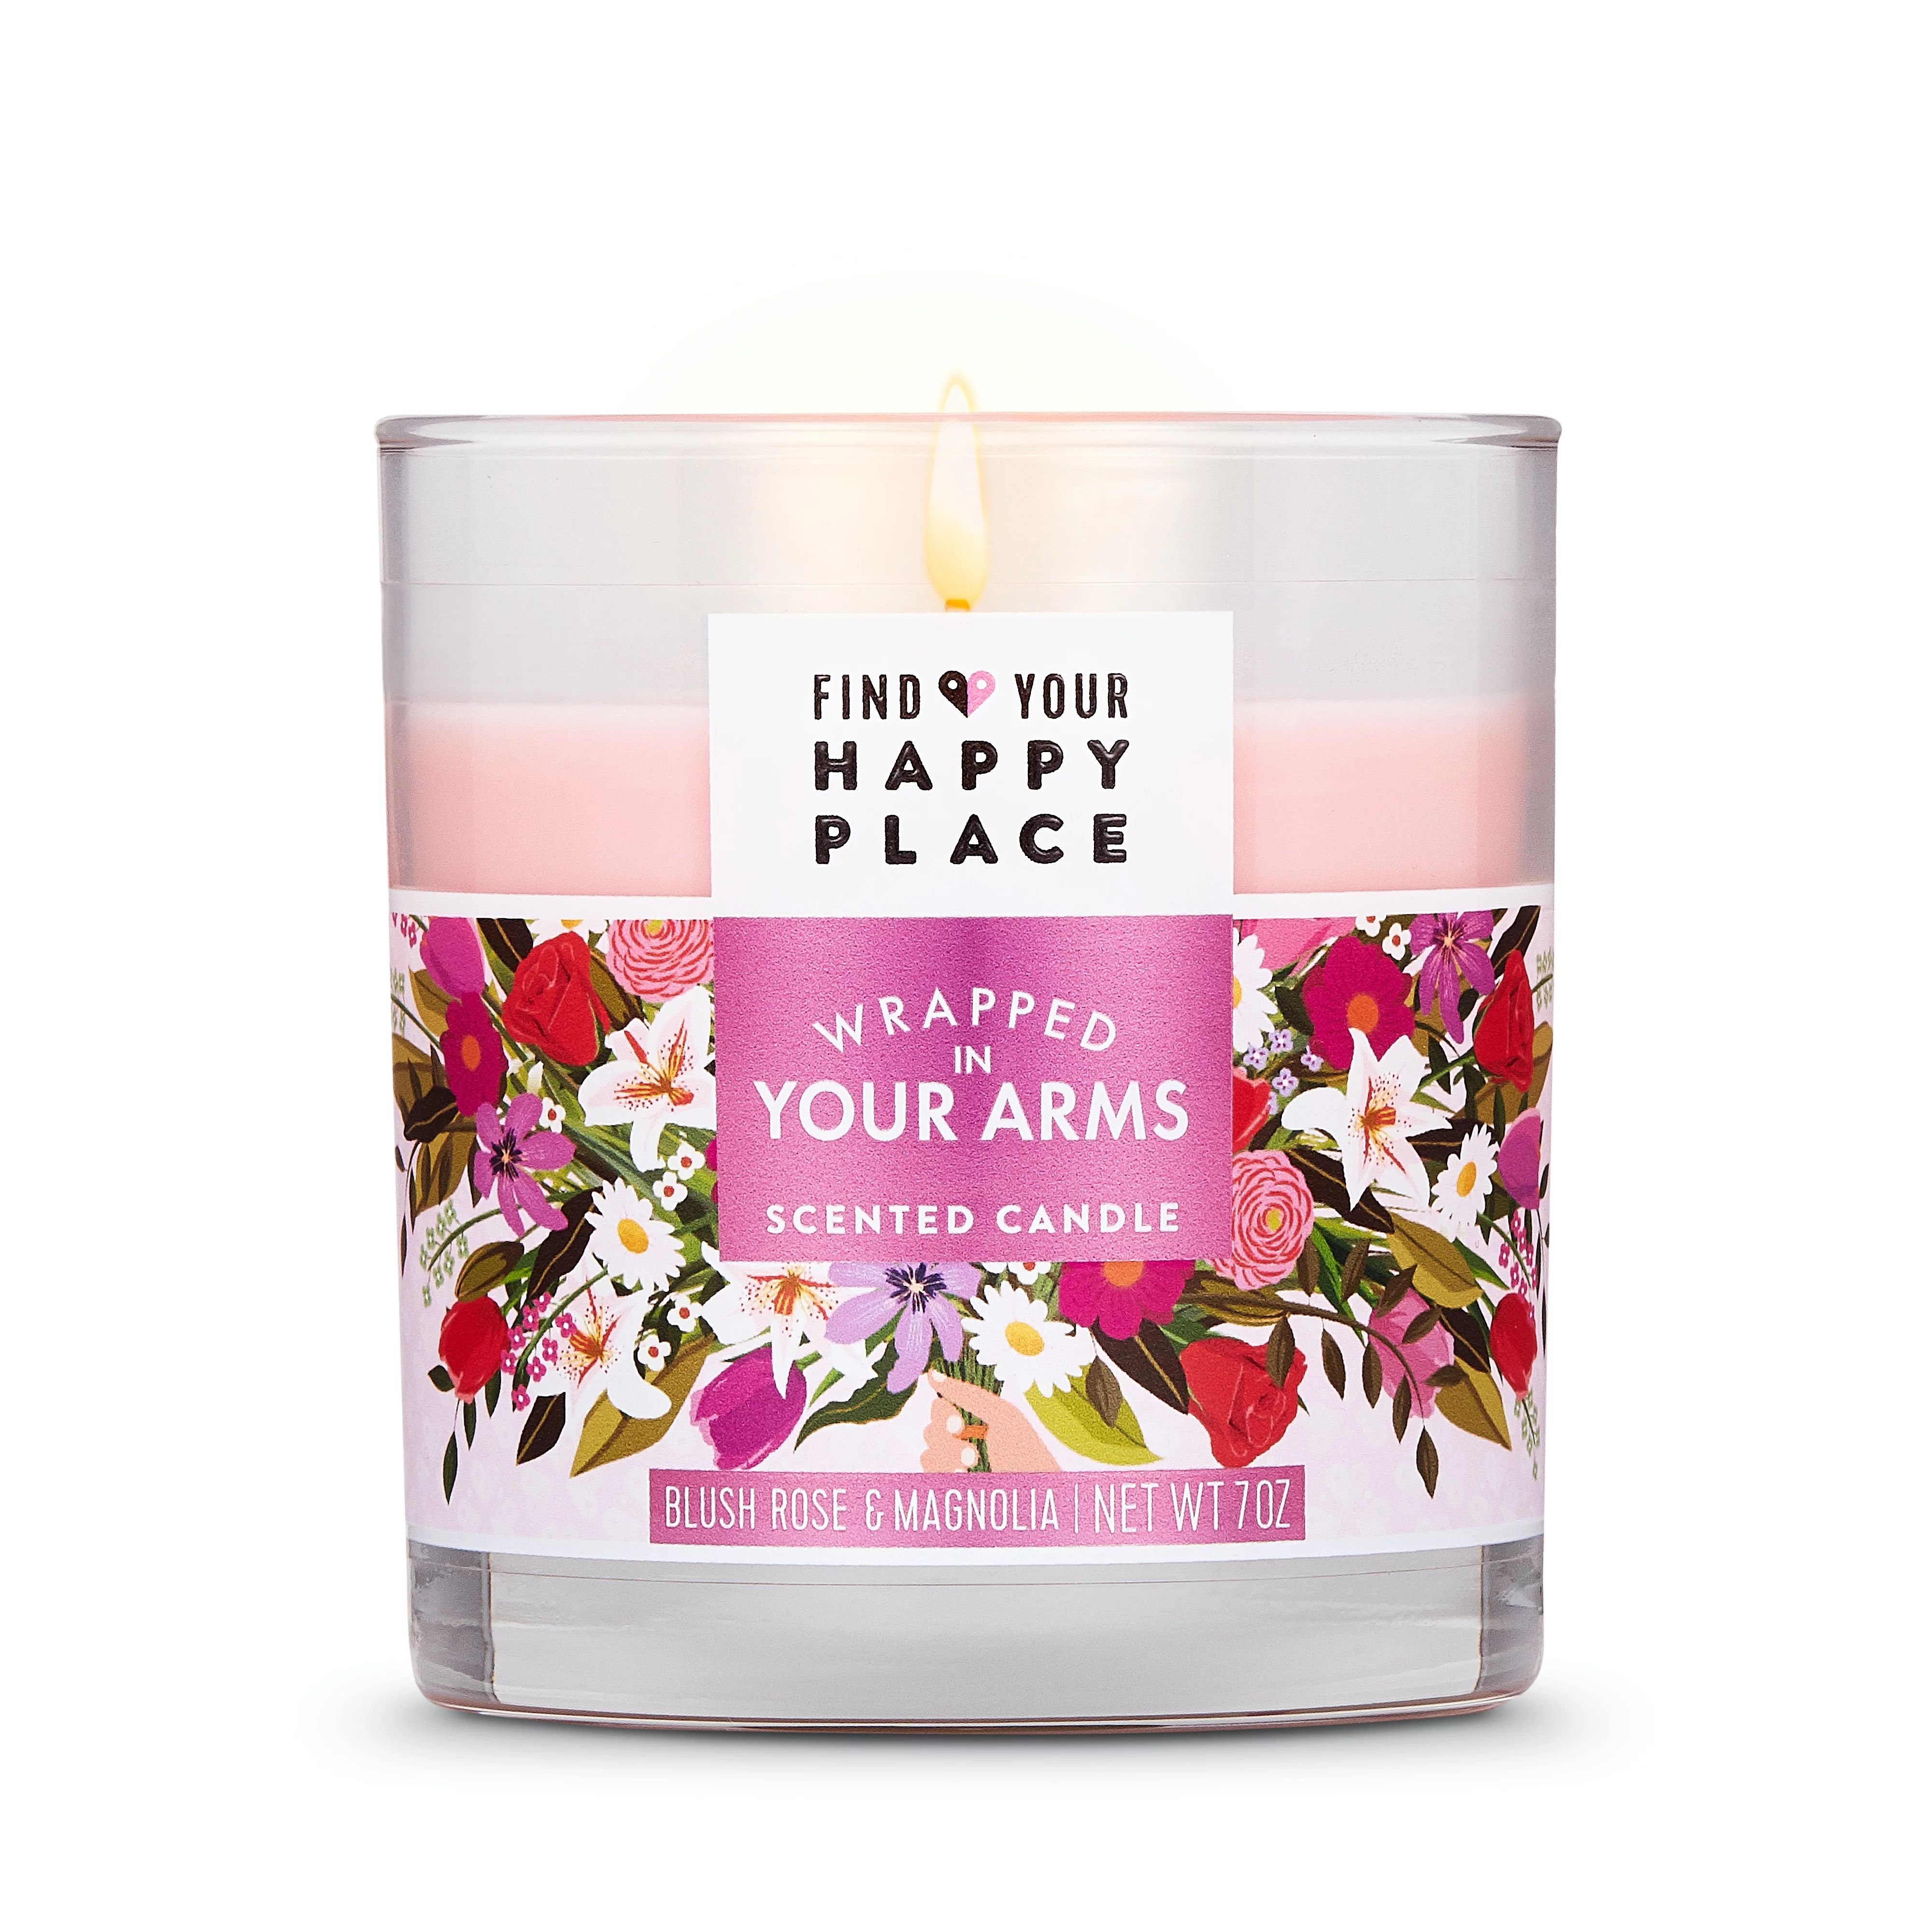 Find Your Happy Place Scented Candle Wrapped In Your Arms Blush Rose and Magnolia 7 oz | Walmart (US)